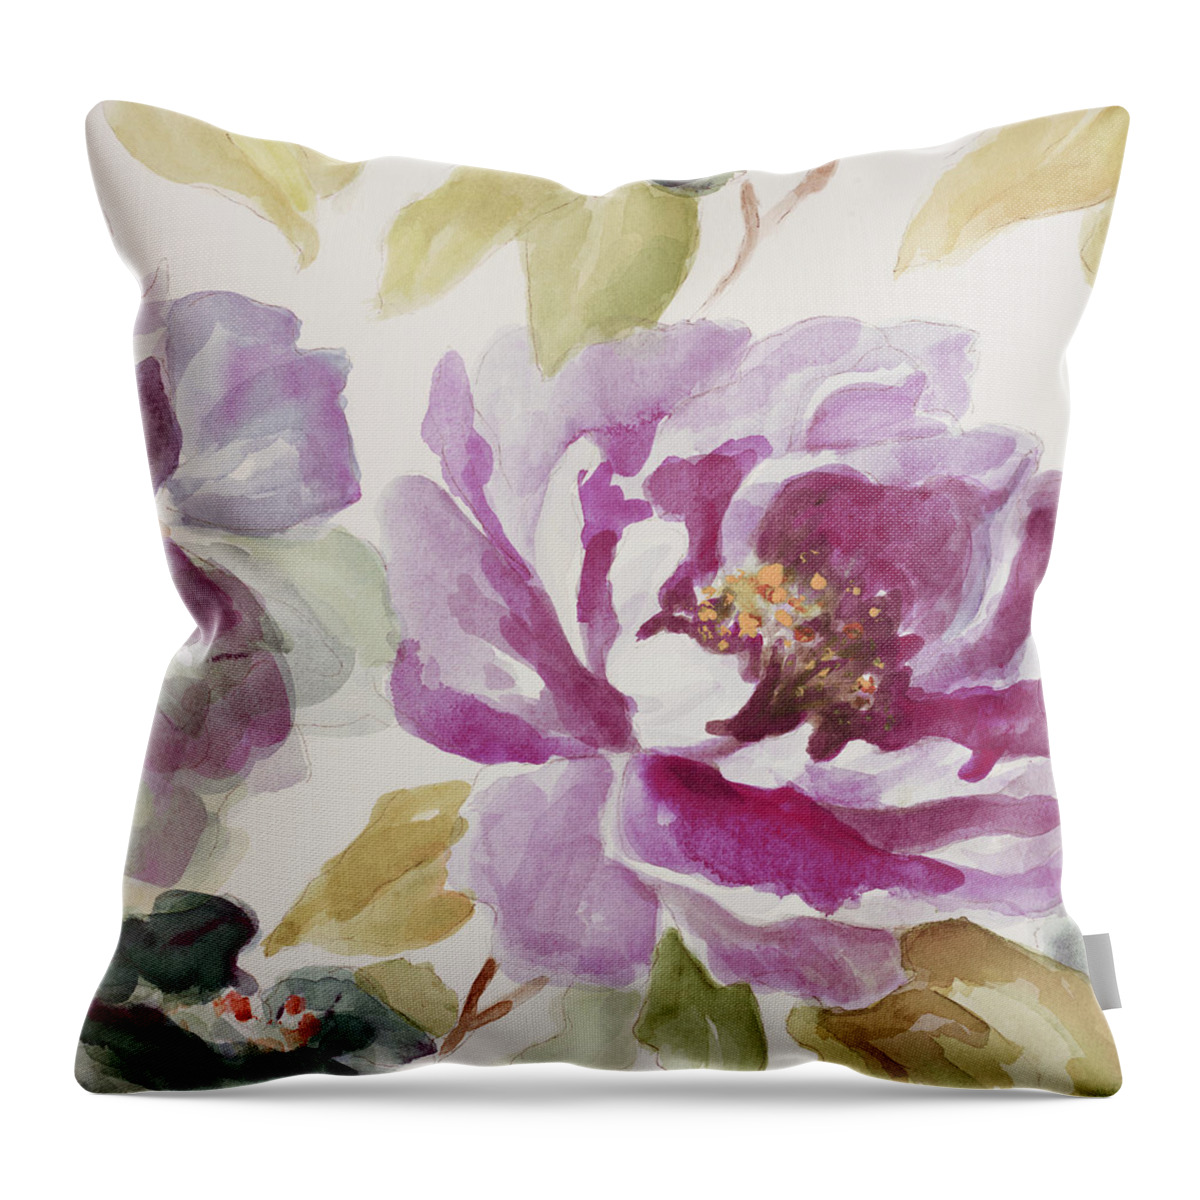 Pink Throw Pillow featuring the painting Purple Floral Delicate by Lanie Loreth